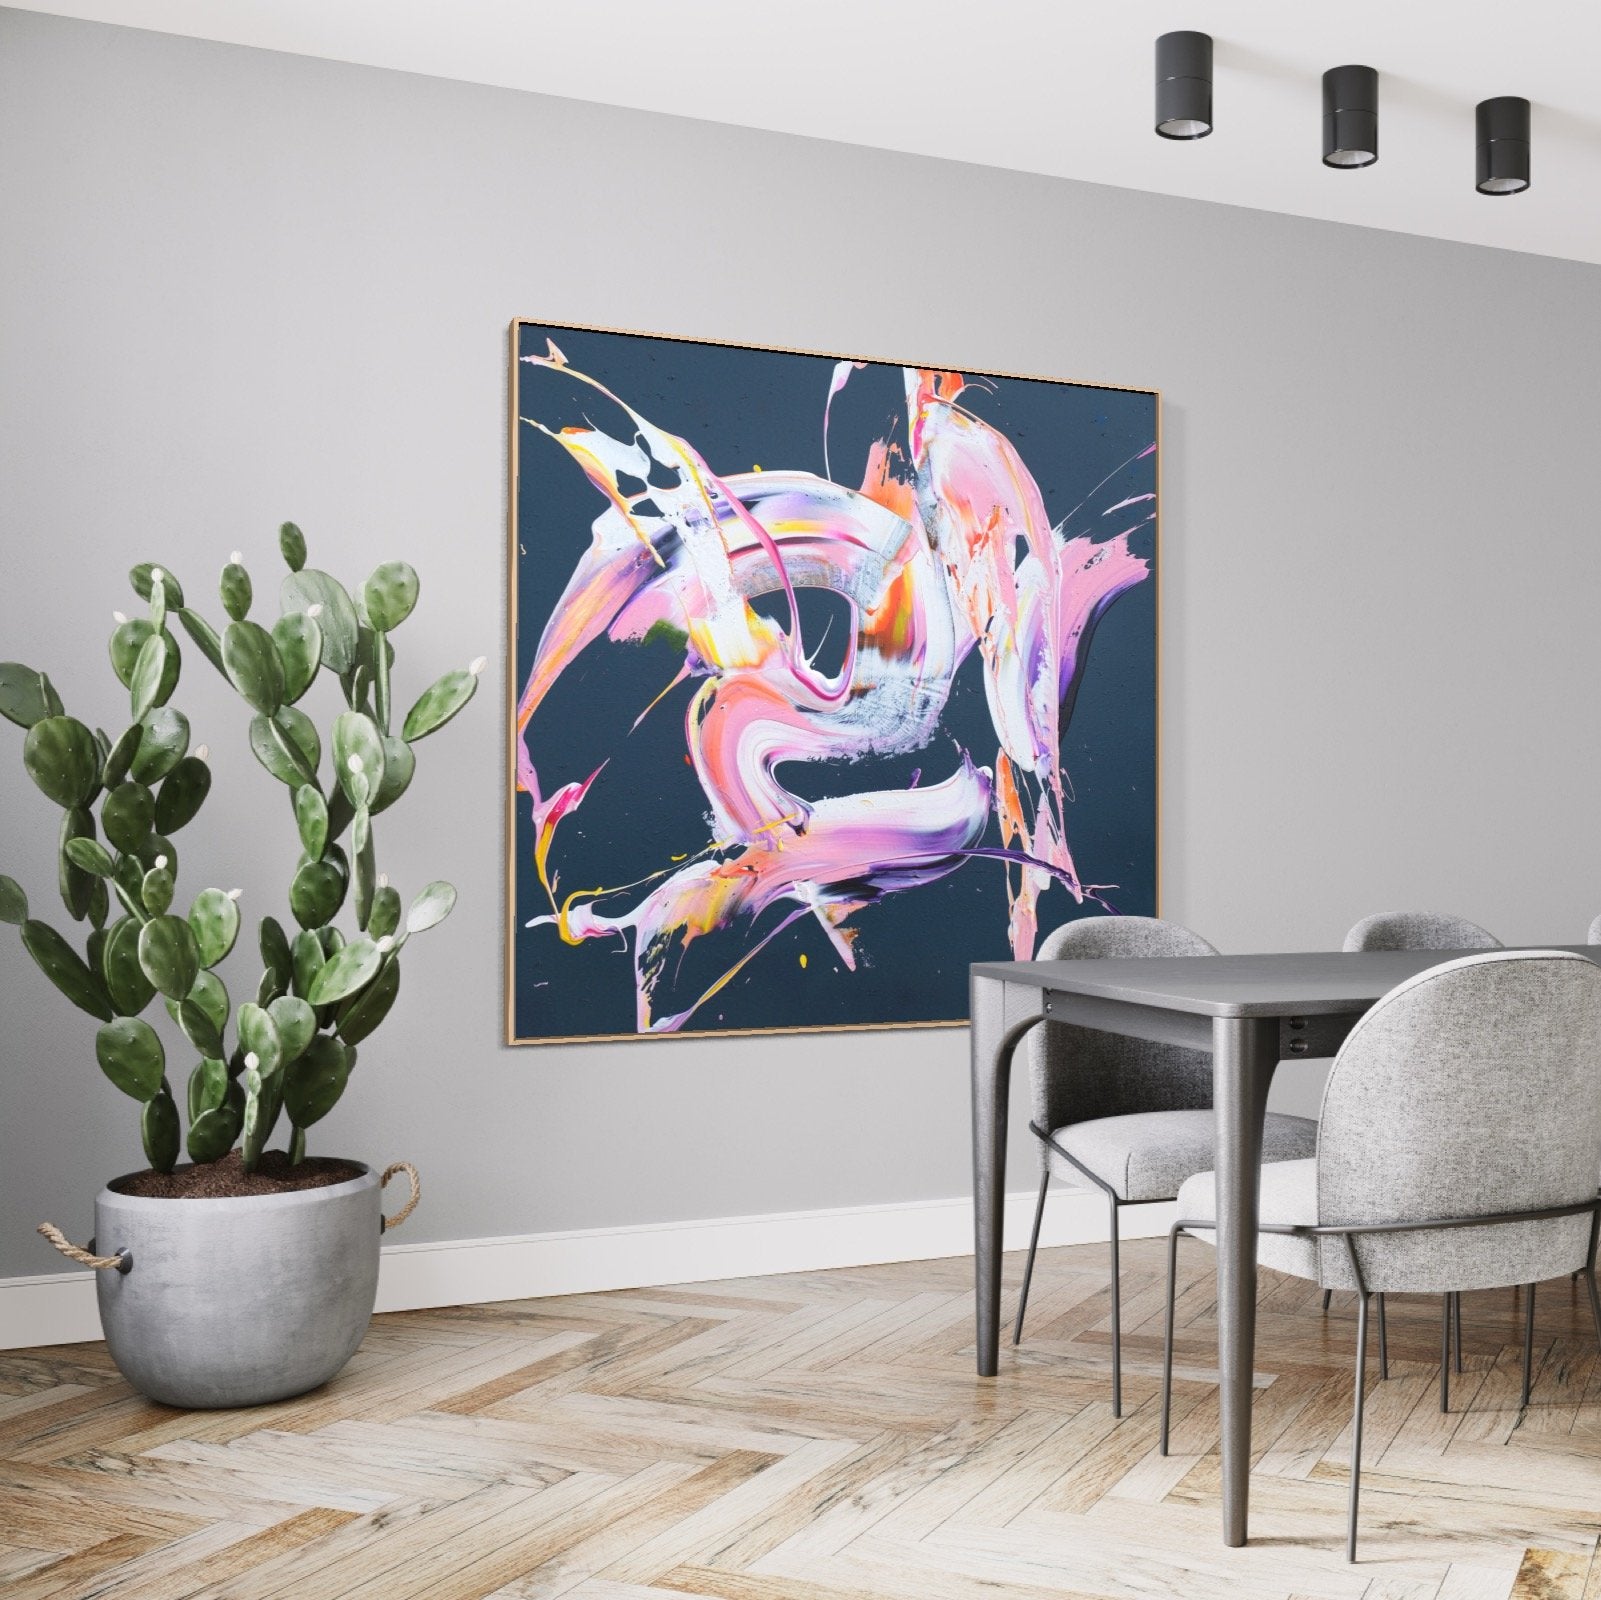 Canvas Print: "Less Is More #14"